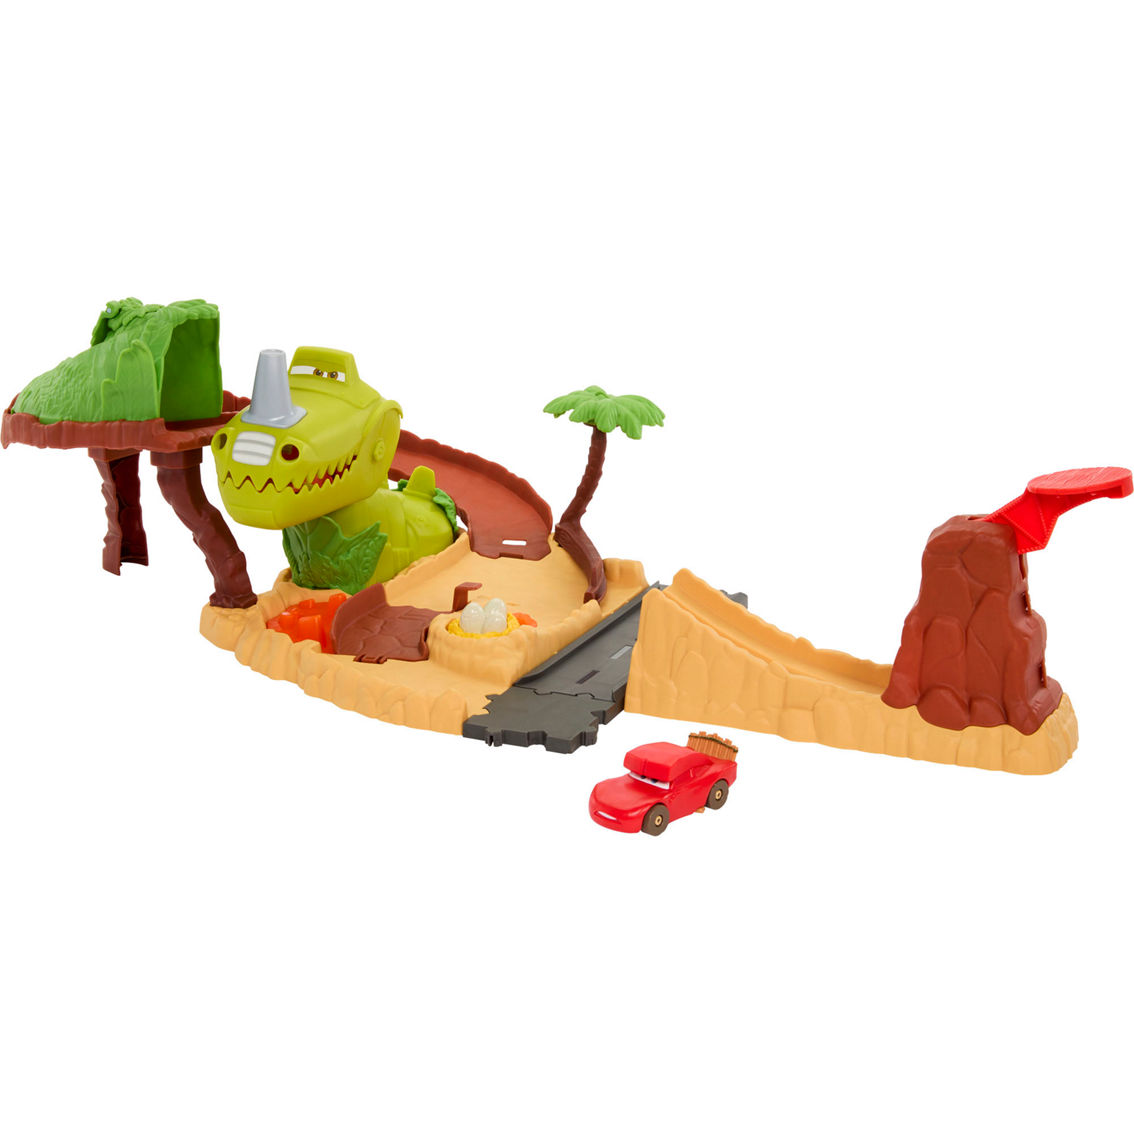 Disney and Pixar Cars On the Road Dino Playground Playset - Image 2 of 5